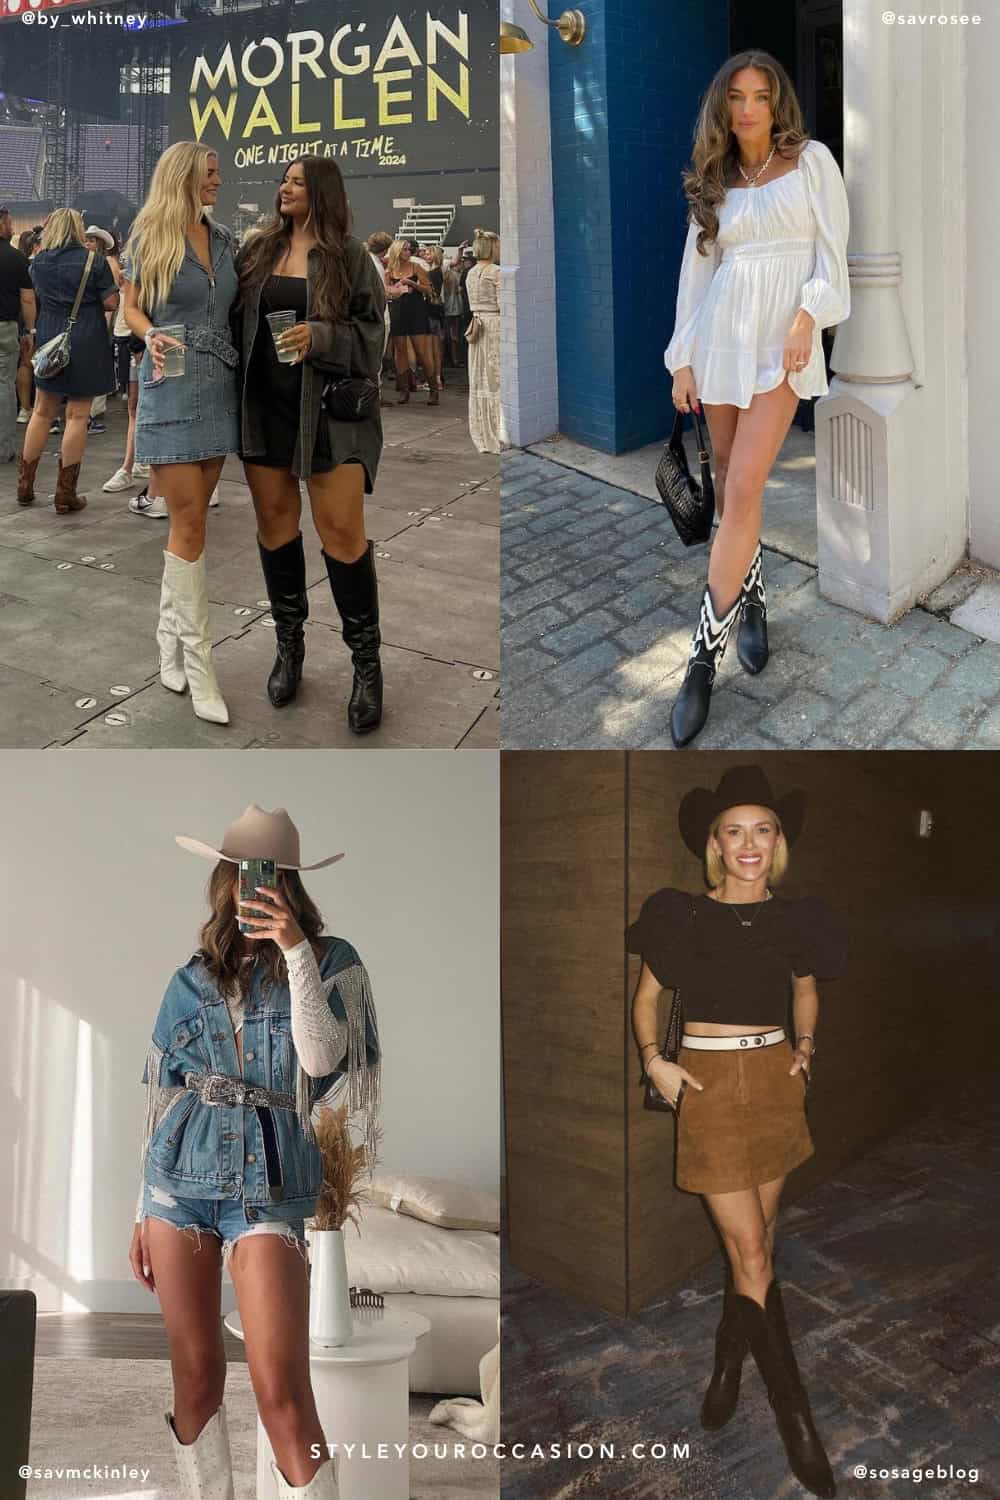 collage of four images of women wearing stylish country concert outfits